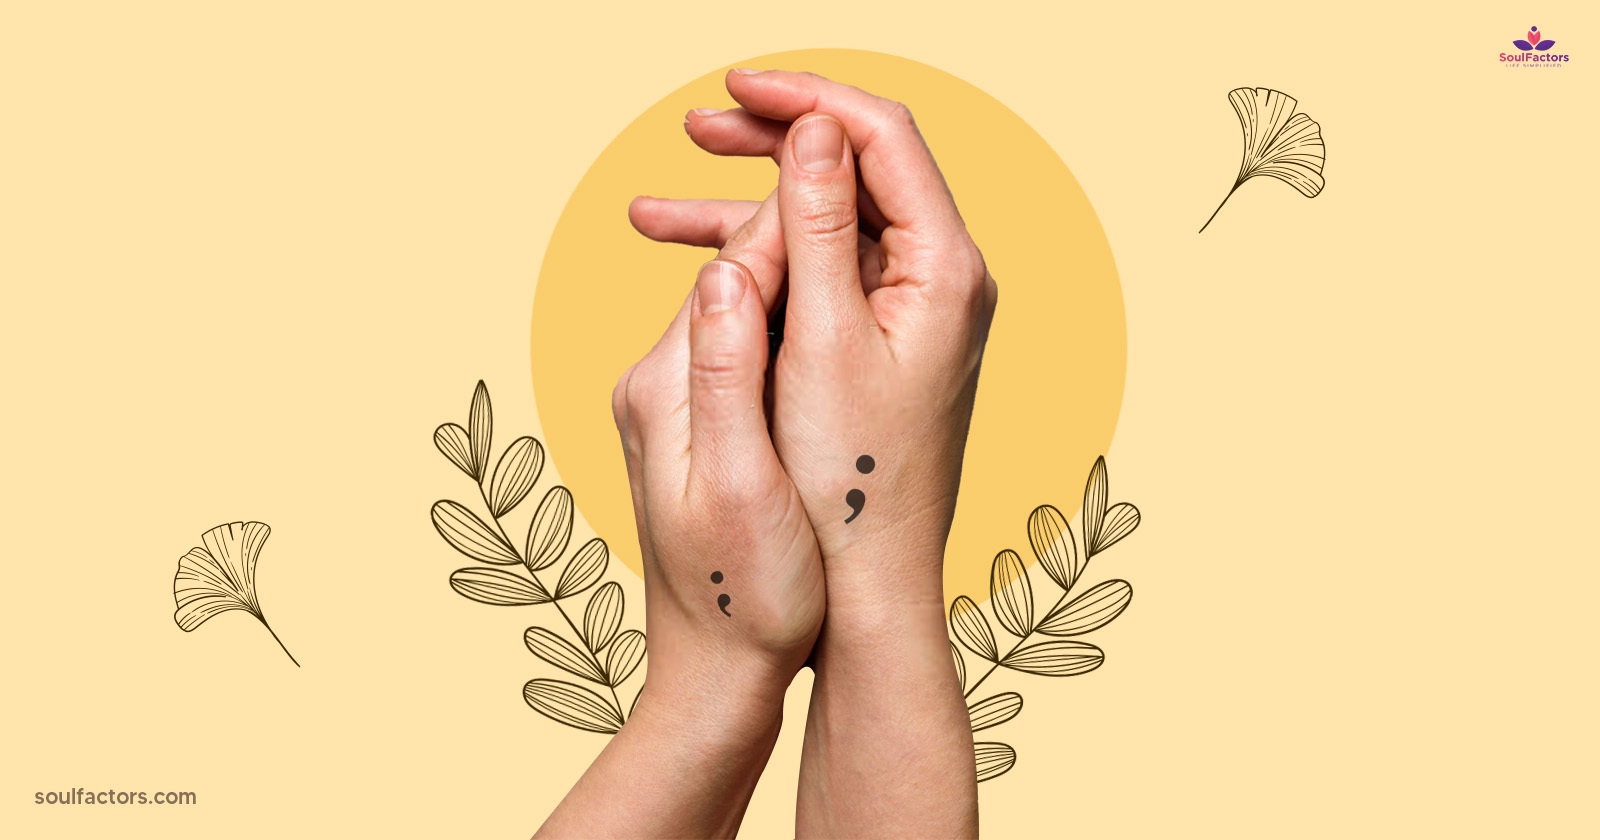 2. Semicolon Tattoo Designs and Their Significance - wide 4